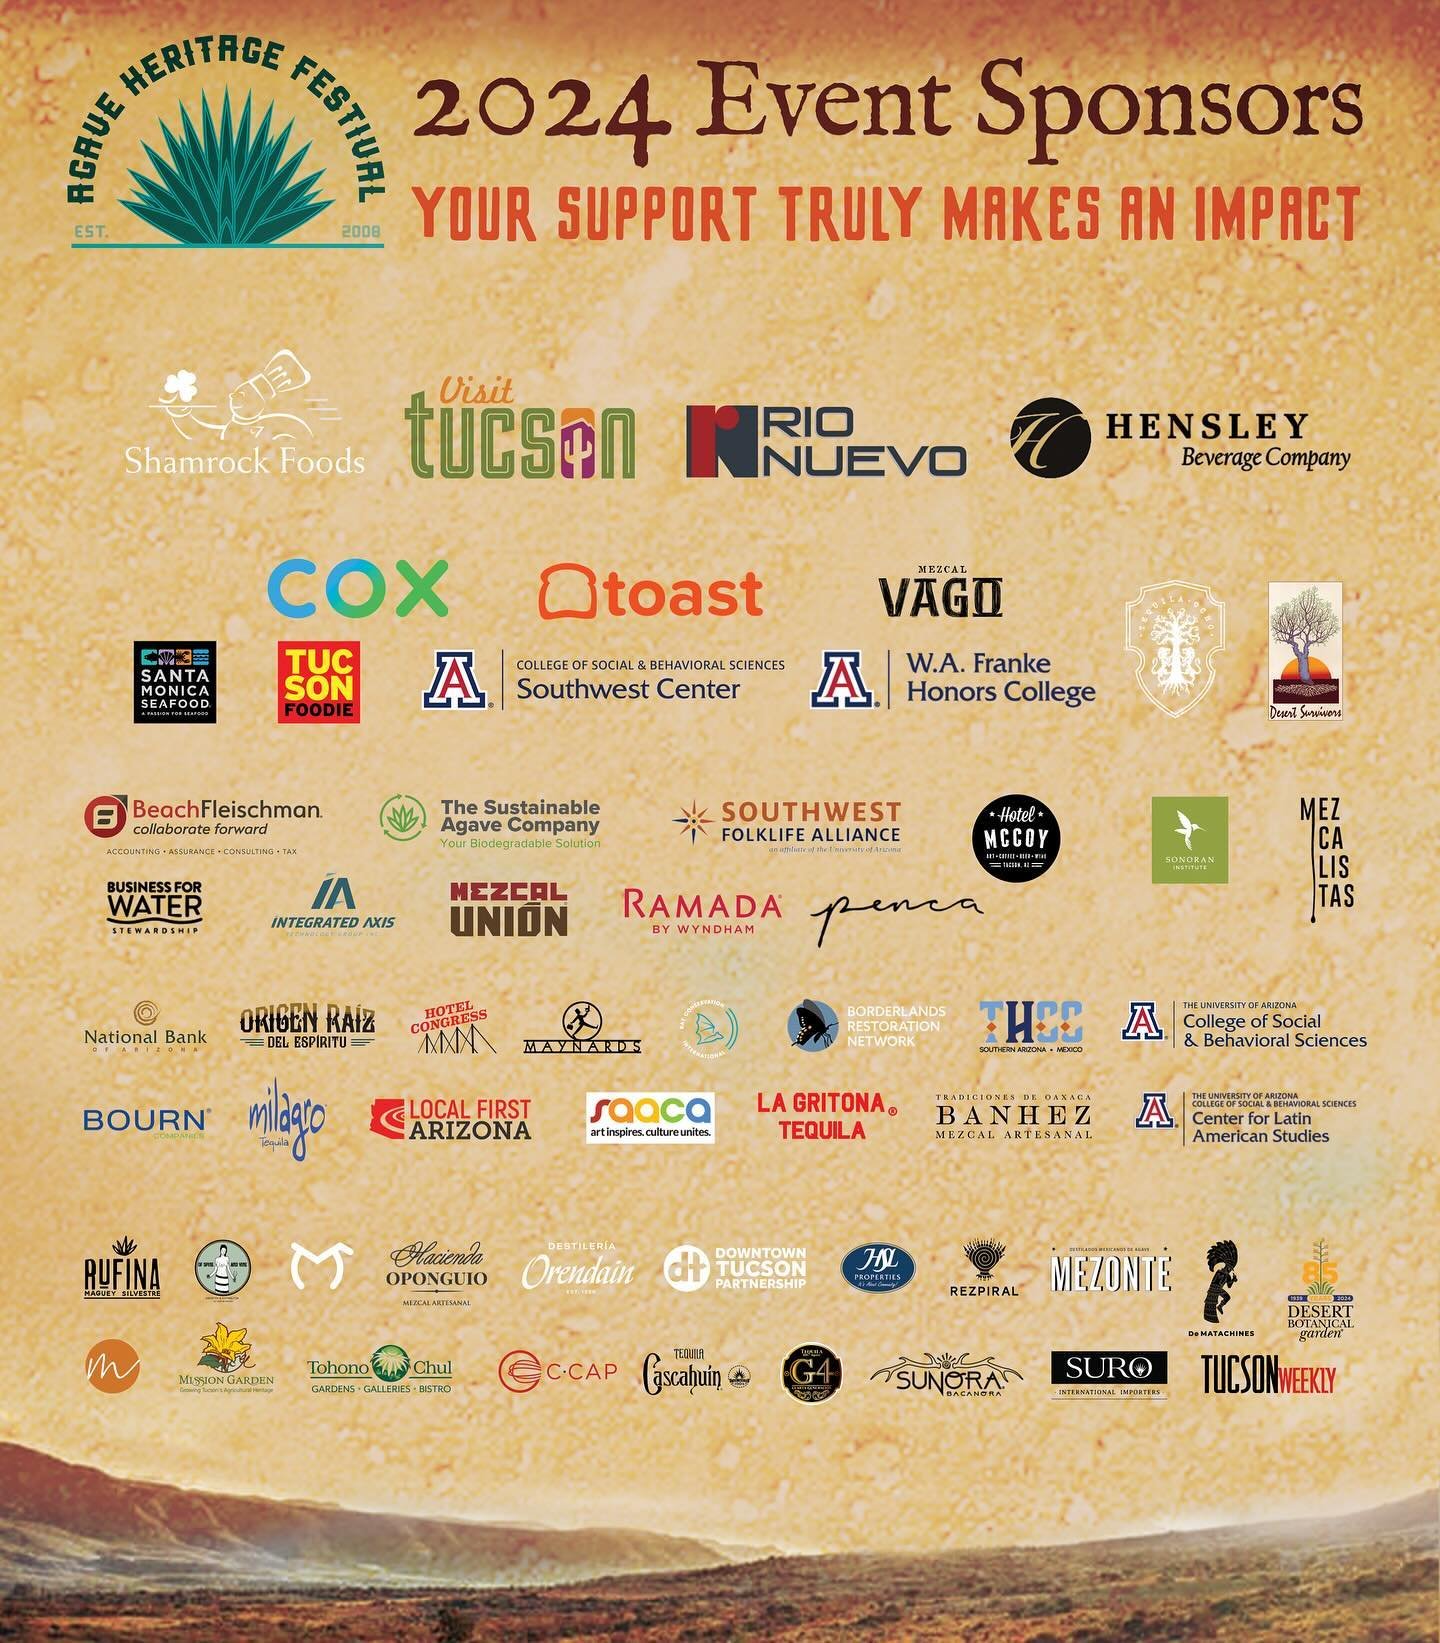 Agave Heritage Festival kicks off TODAY, and it wouldn&rsquo;t be possible without our sponsors! A huge thank you &mdash; your support truly makes an impact. Tagged + @shamrockfoods @visittucson @hensleybeverage @coxcommunications @toasttab @mezcalva